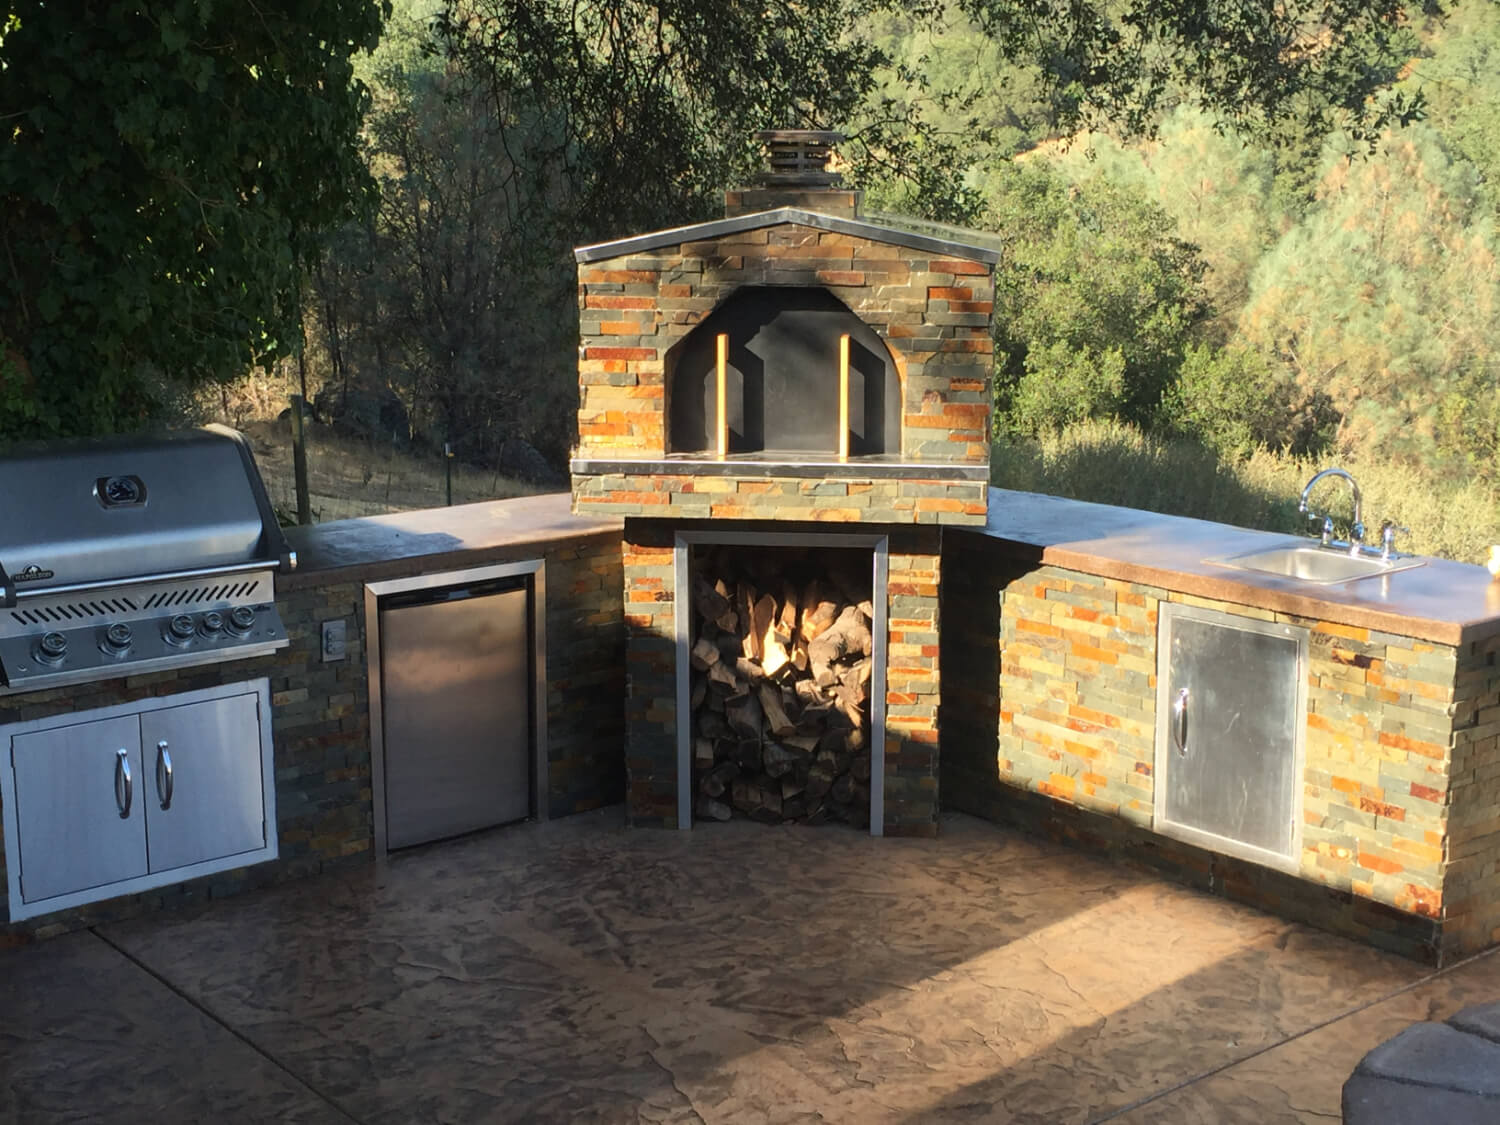 https://cdn.shopify.com/s/files/1/0568/6758/6256/t/9/assets/outdoor-pizza-oven-and-grill-10-fUR_1500x.JPG?v=1655862700